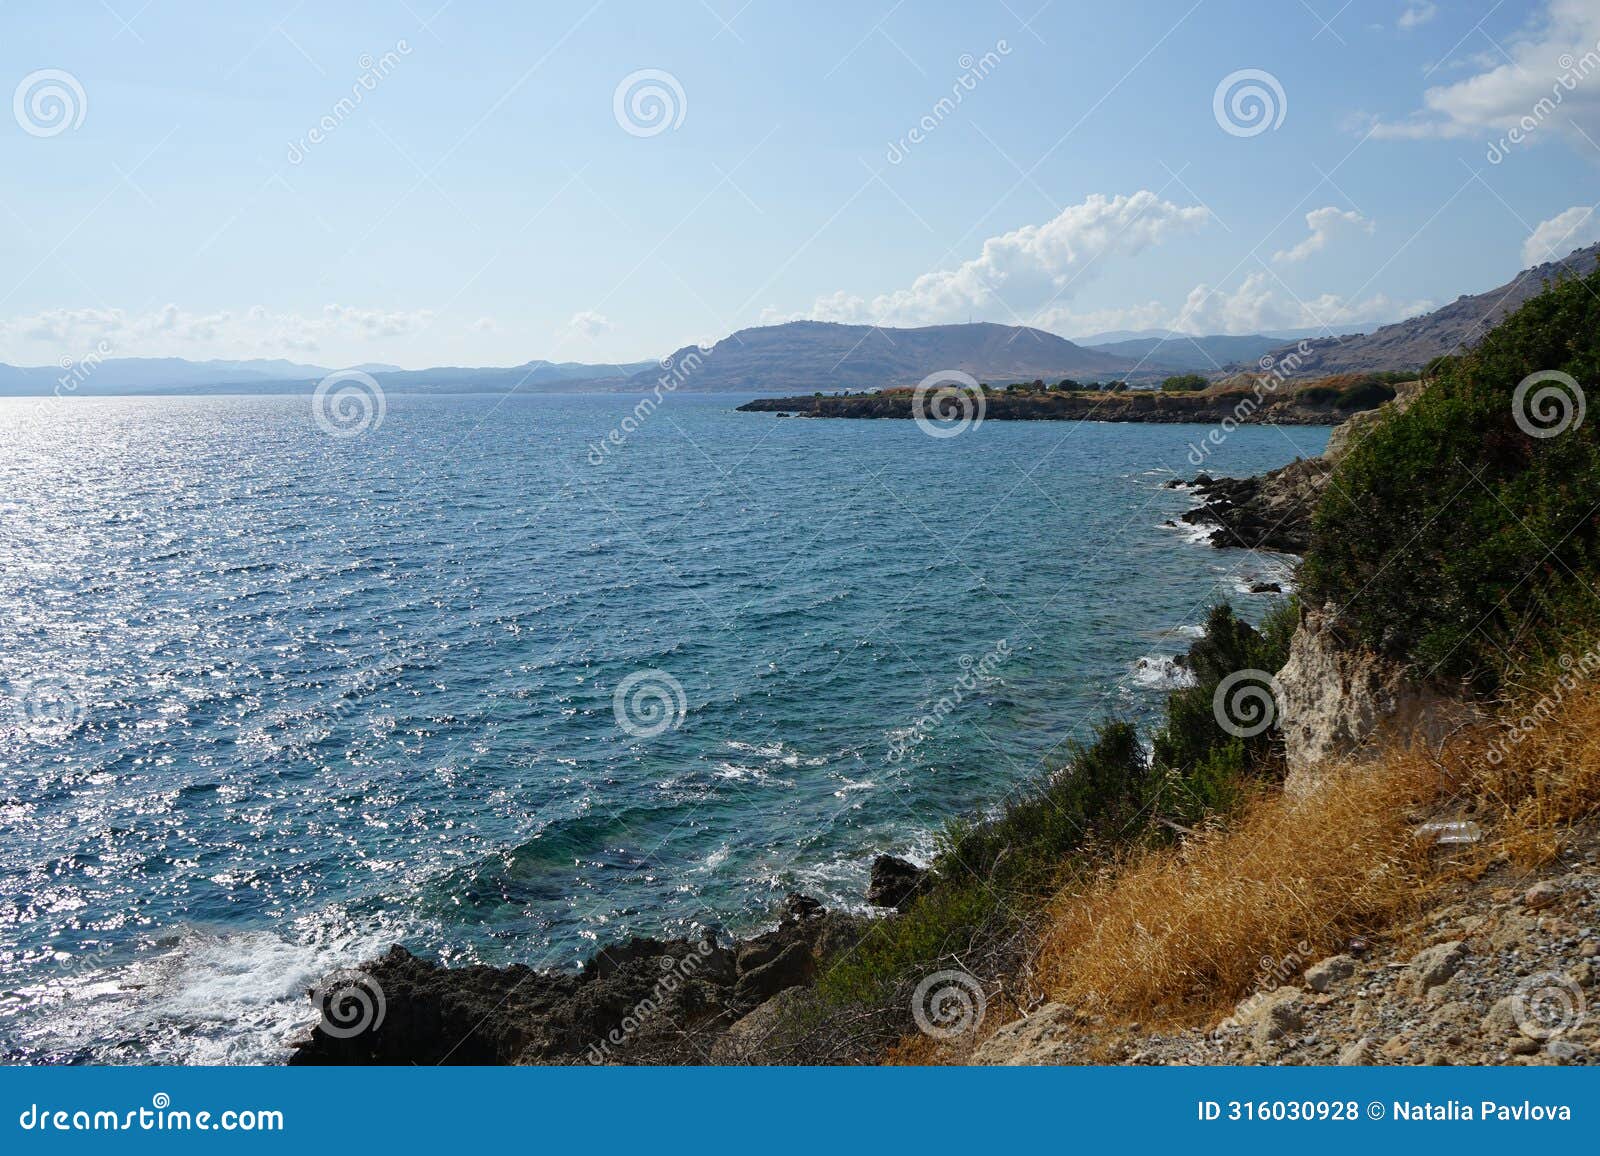 view of the mediterranean coast in the vicinity of pefki in august. pefkos or pefki, rhodes island, greece